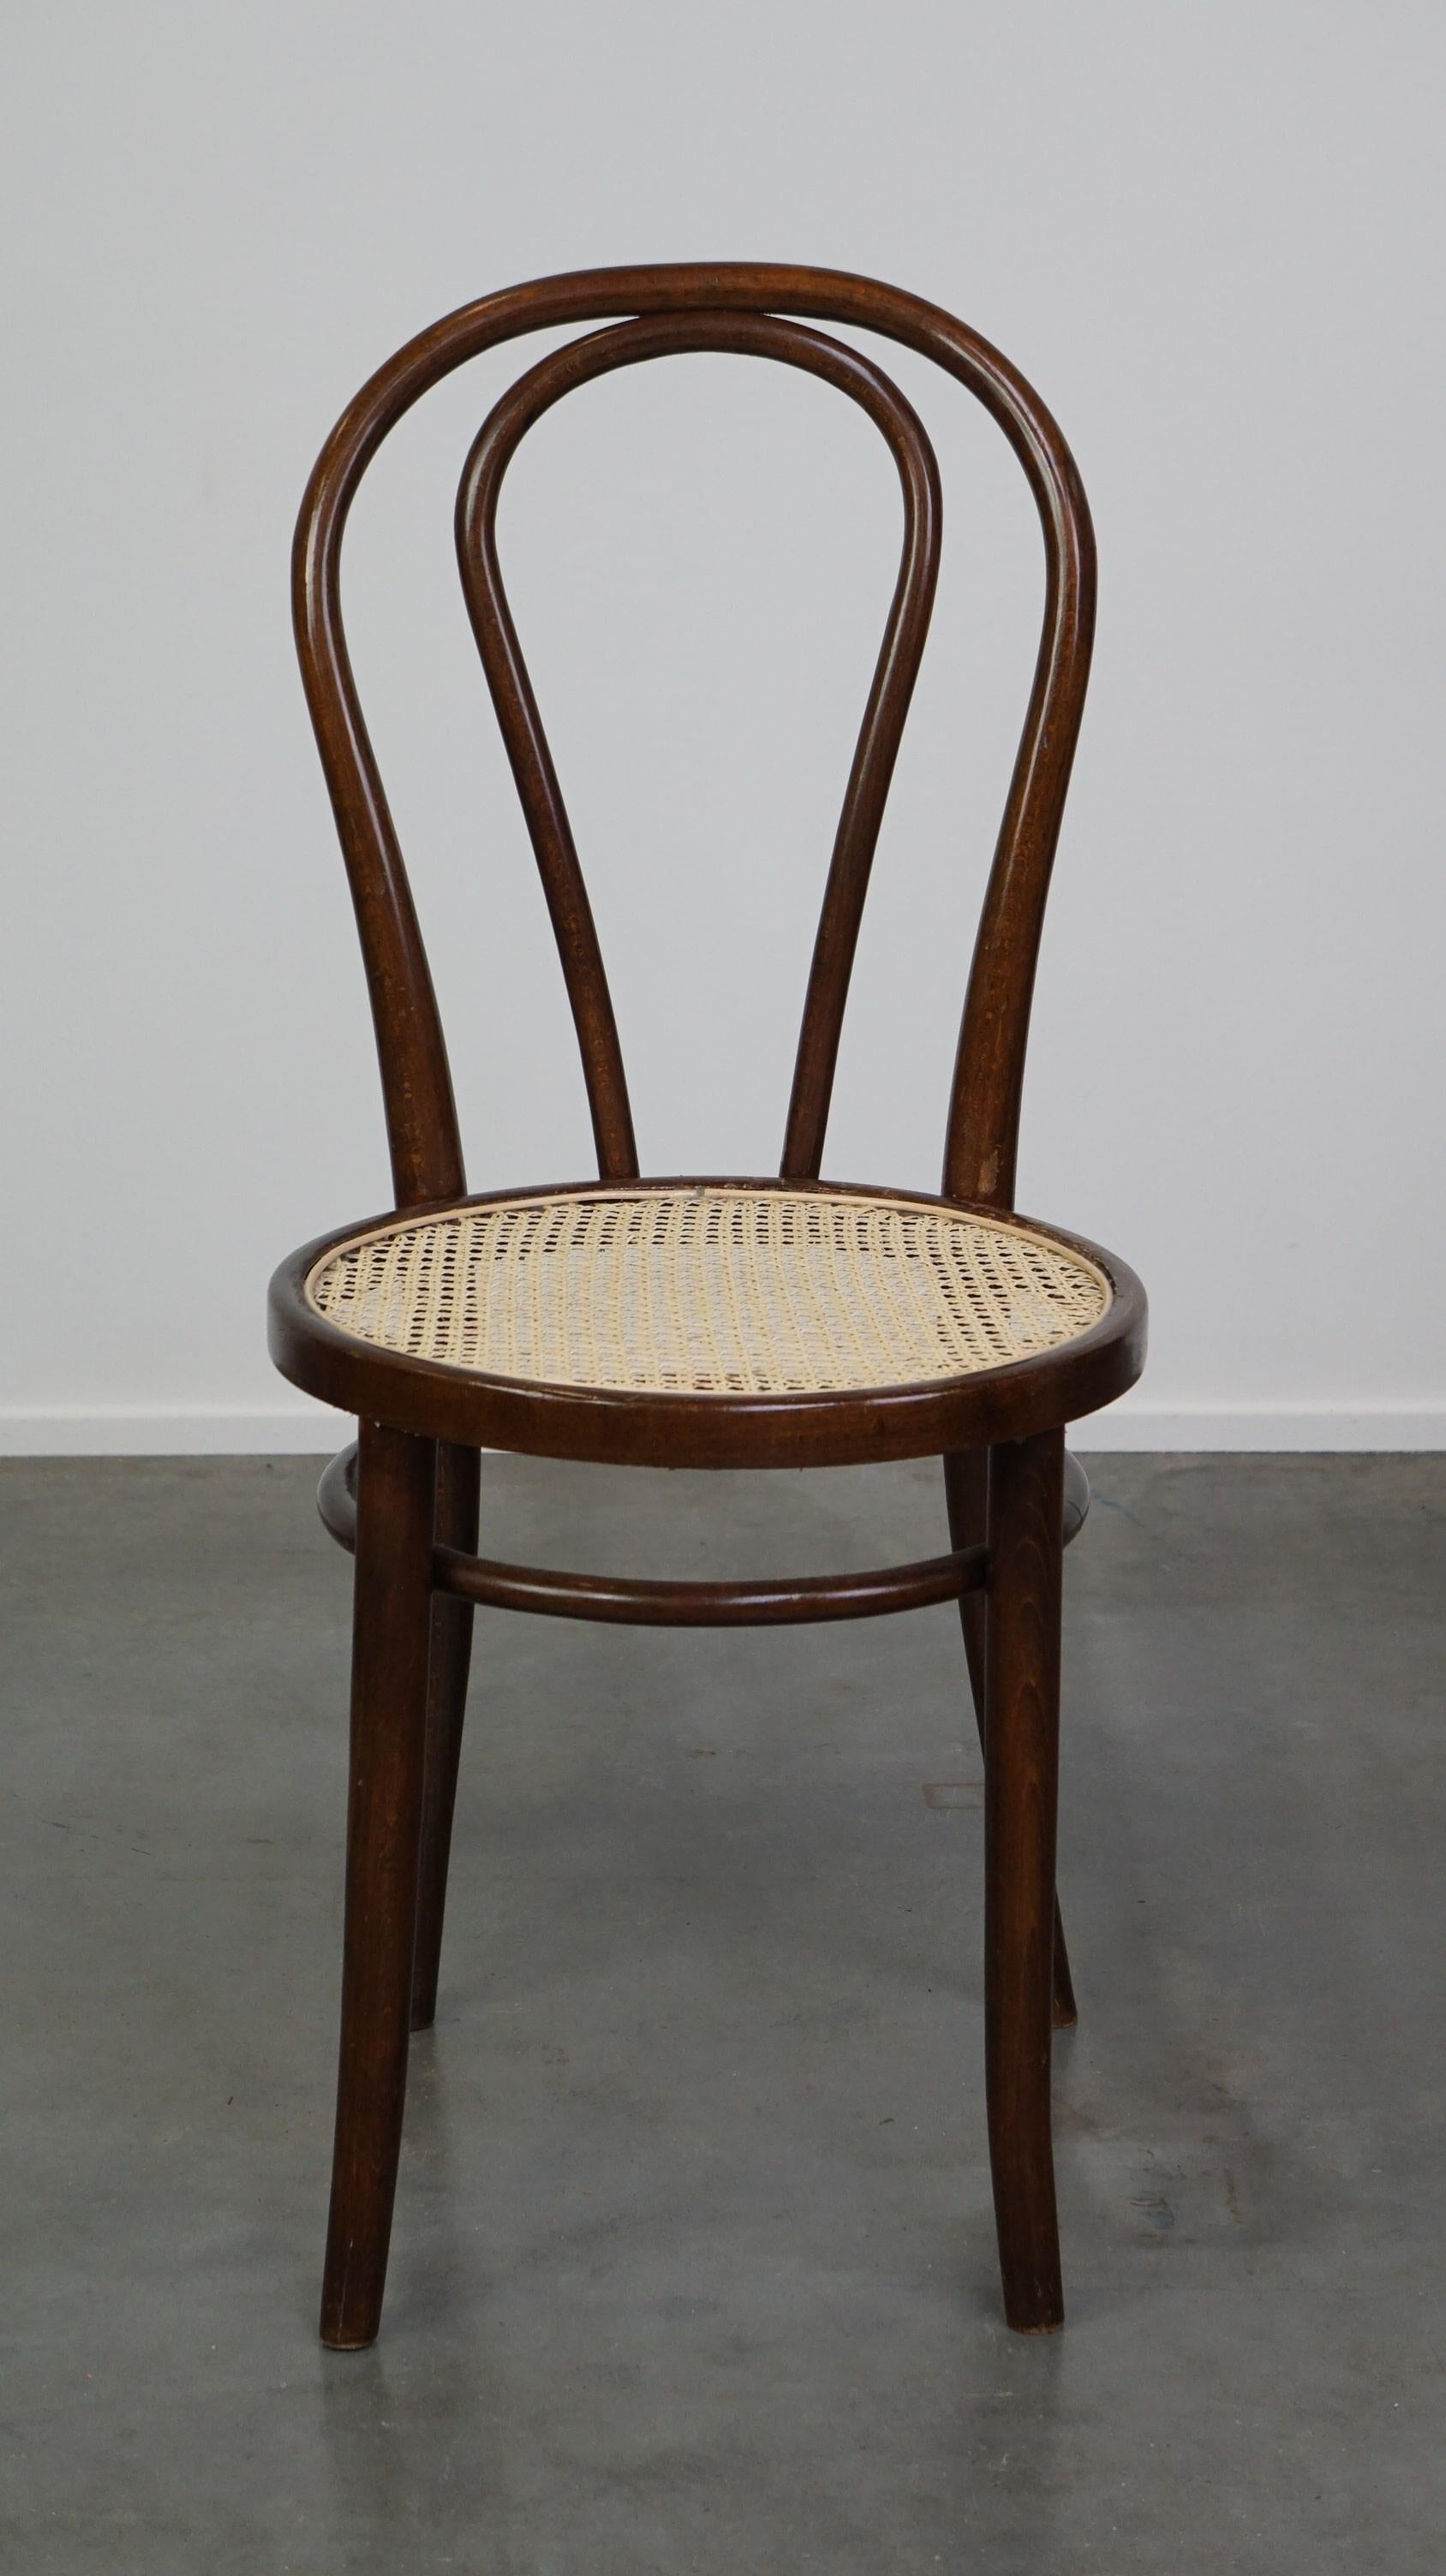 Chair no. 18, also known as the bistro chair, designed by Thonet, was one of the most famous chairs alongside chair no. 14. They both have a half-rounded backrest. This chair was produced by the Austrian designer Josef Hoffmann, probably around